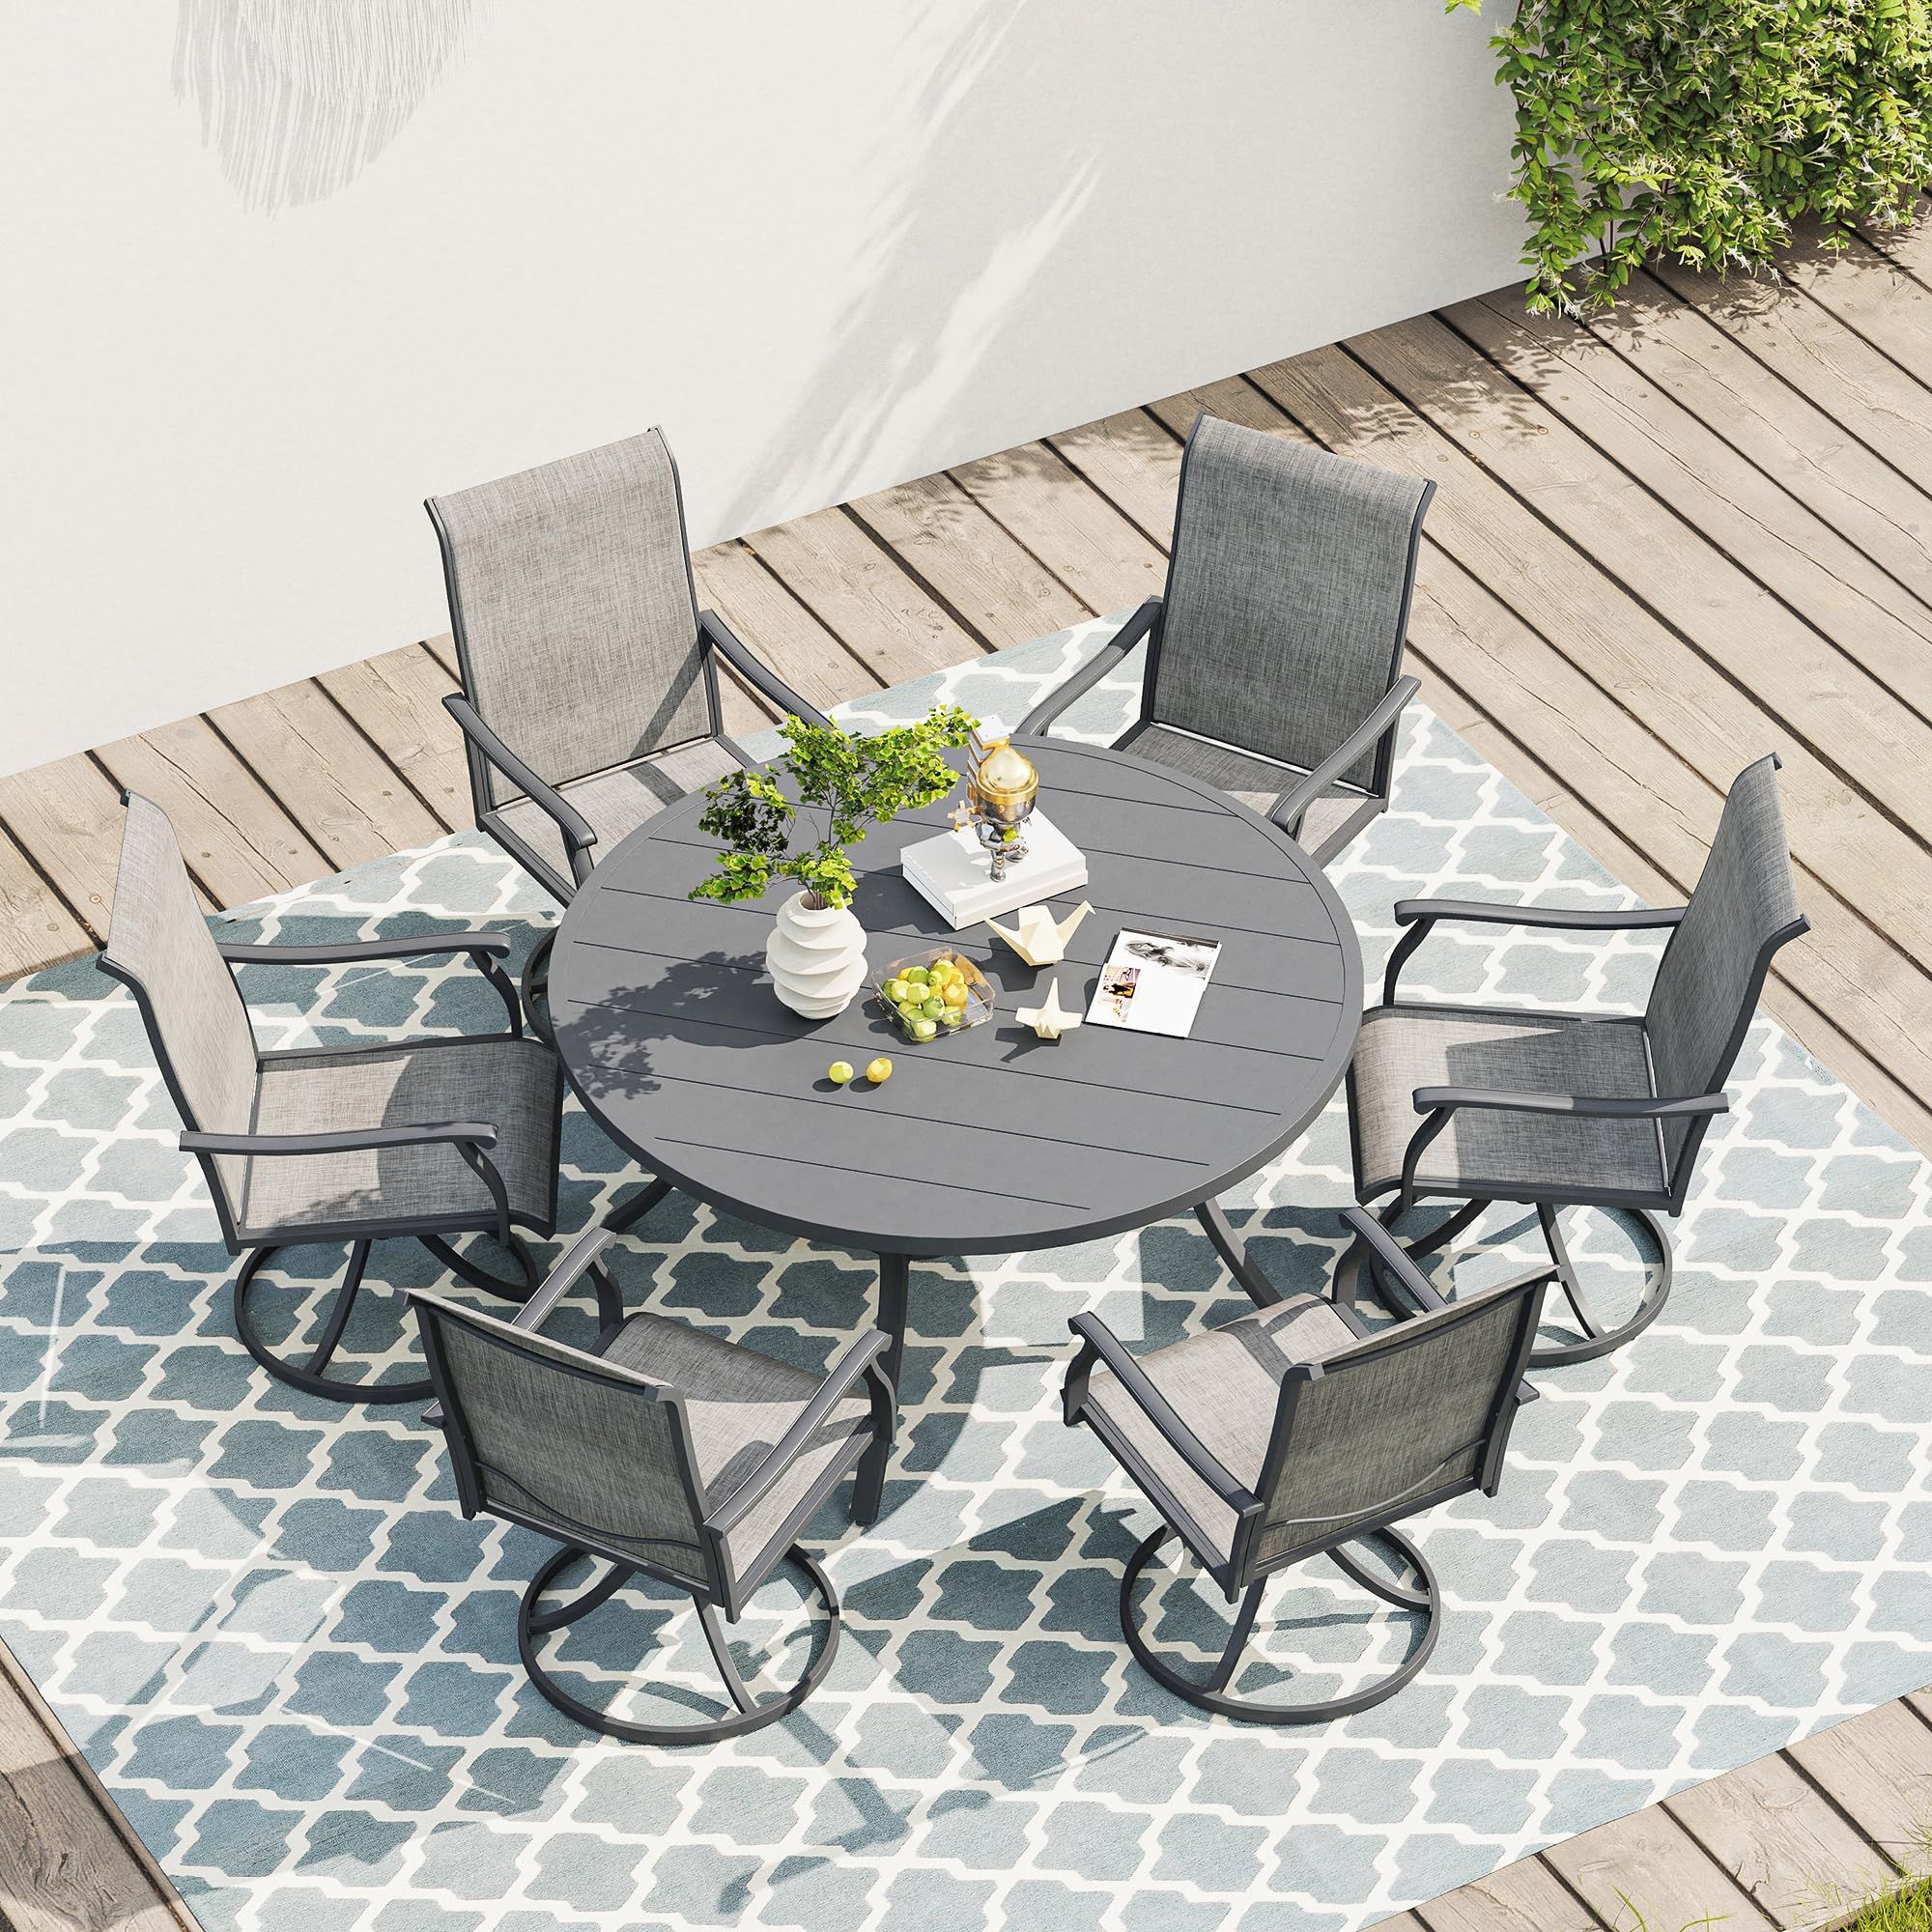 VICLLAX 7 Pieces Patio Dining Set, 6 Patio Swivel Dining Chairs and Outdoor Round Table with Umbrella Hole Outdoor Backyard Furniture Set for Outside Deck Garden, Dark Grey Table | Amazon (US)